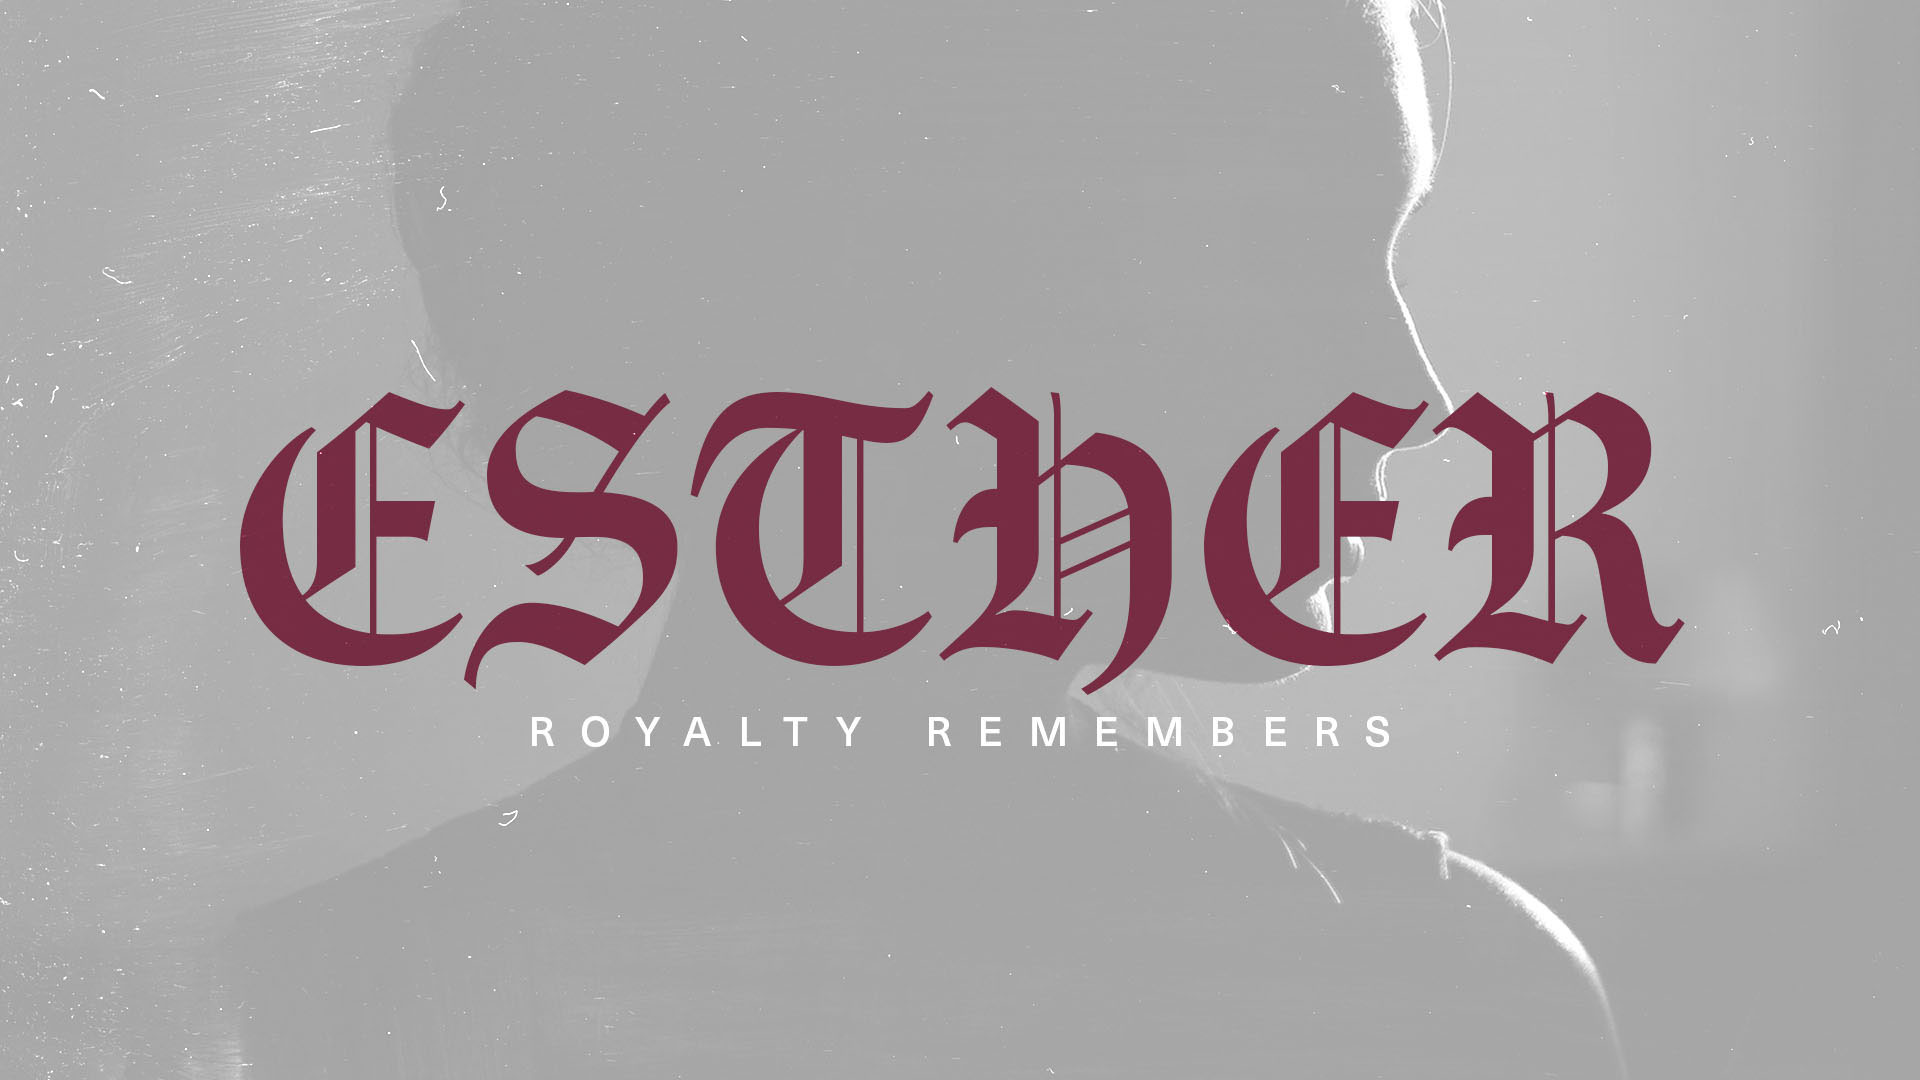 Series: Esther Royalty Remembers